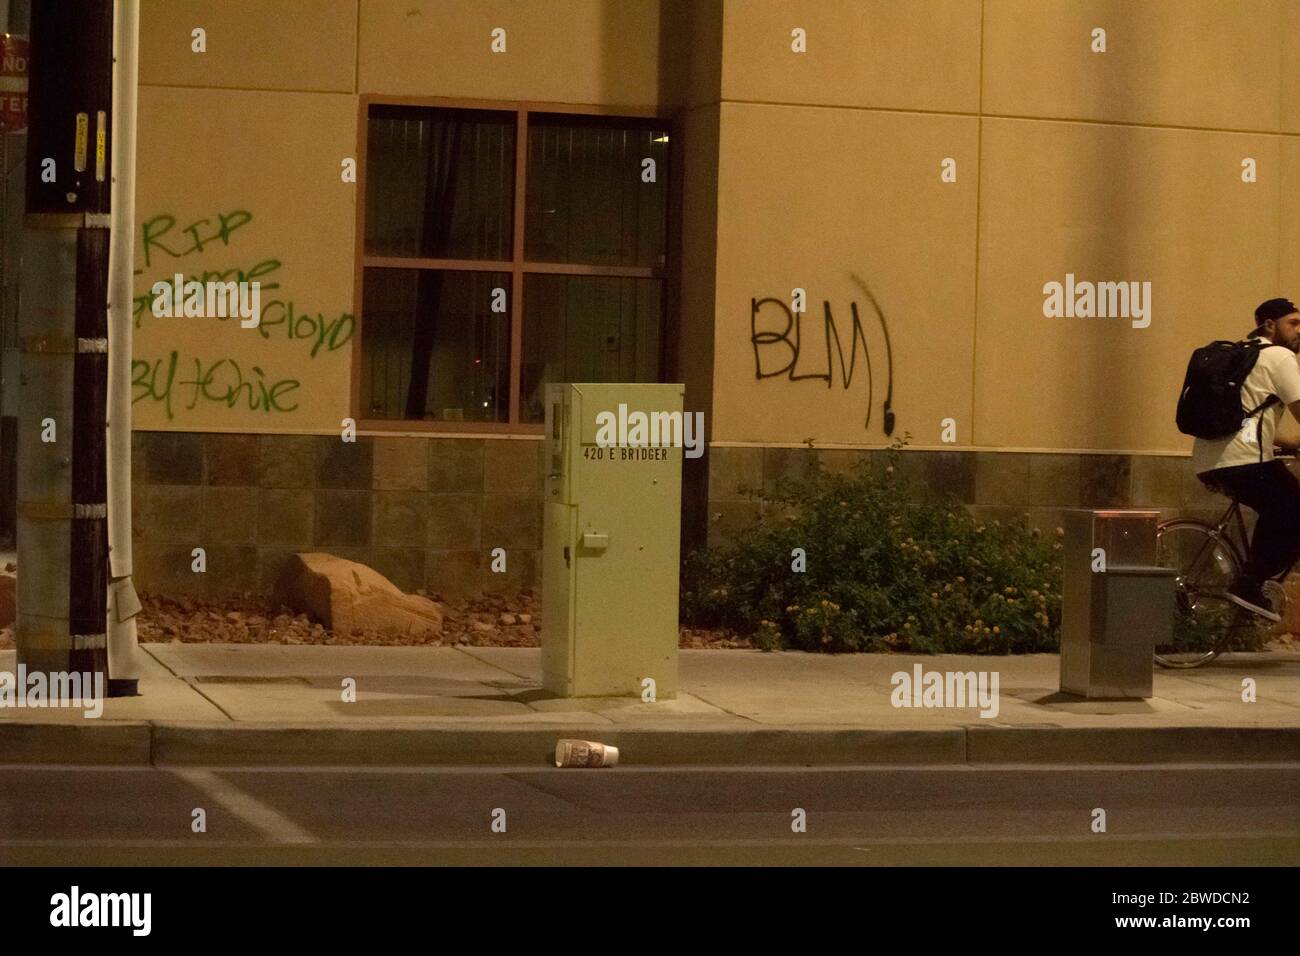 Las Vegas, NV - May 30, 2020: Building with graffiti 'BLM!' and 'RIP George Floyd' as protesters gather to protest and march in a nationwide call for changes in the police departments across the country on May 30, 2020 in downtown Las Vegas, Nevada. Credit: Shannon Beelman/The Photo Access Stock Photo